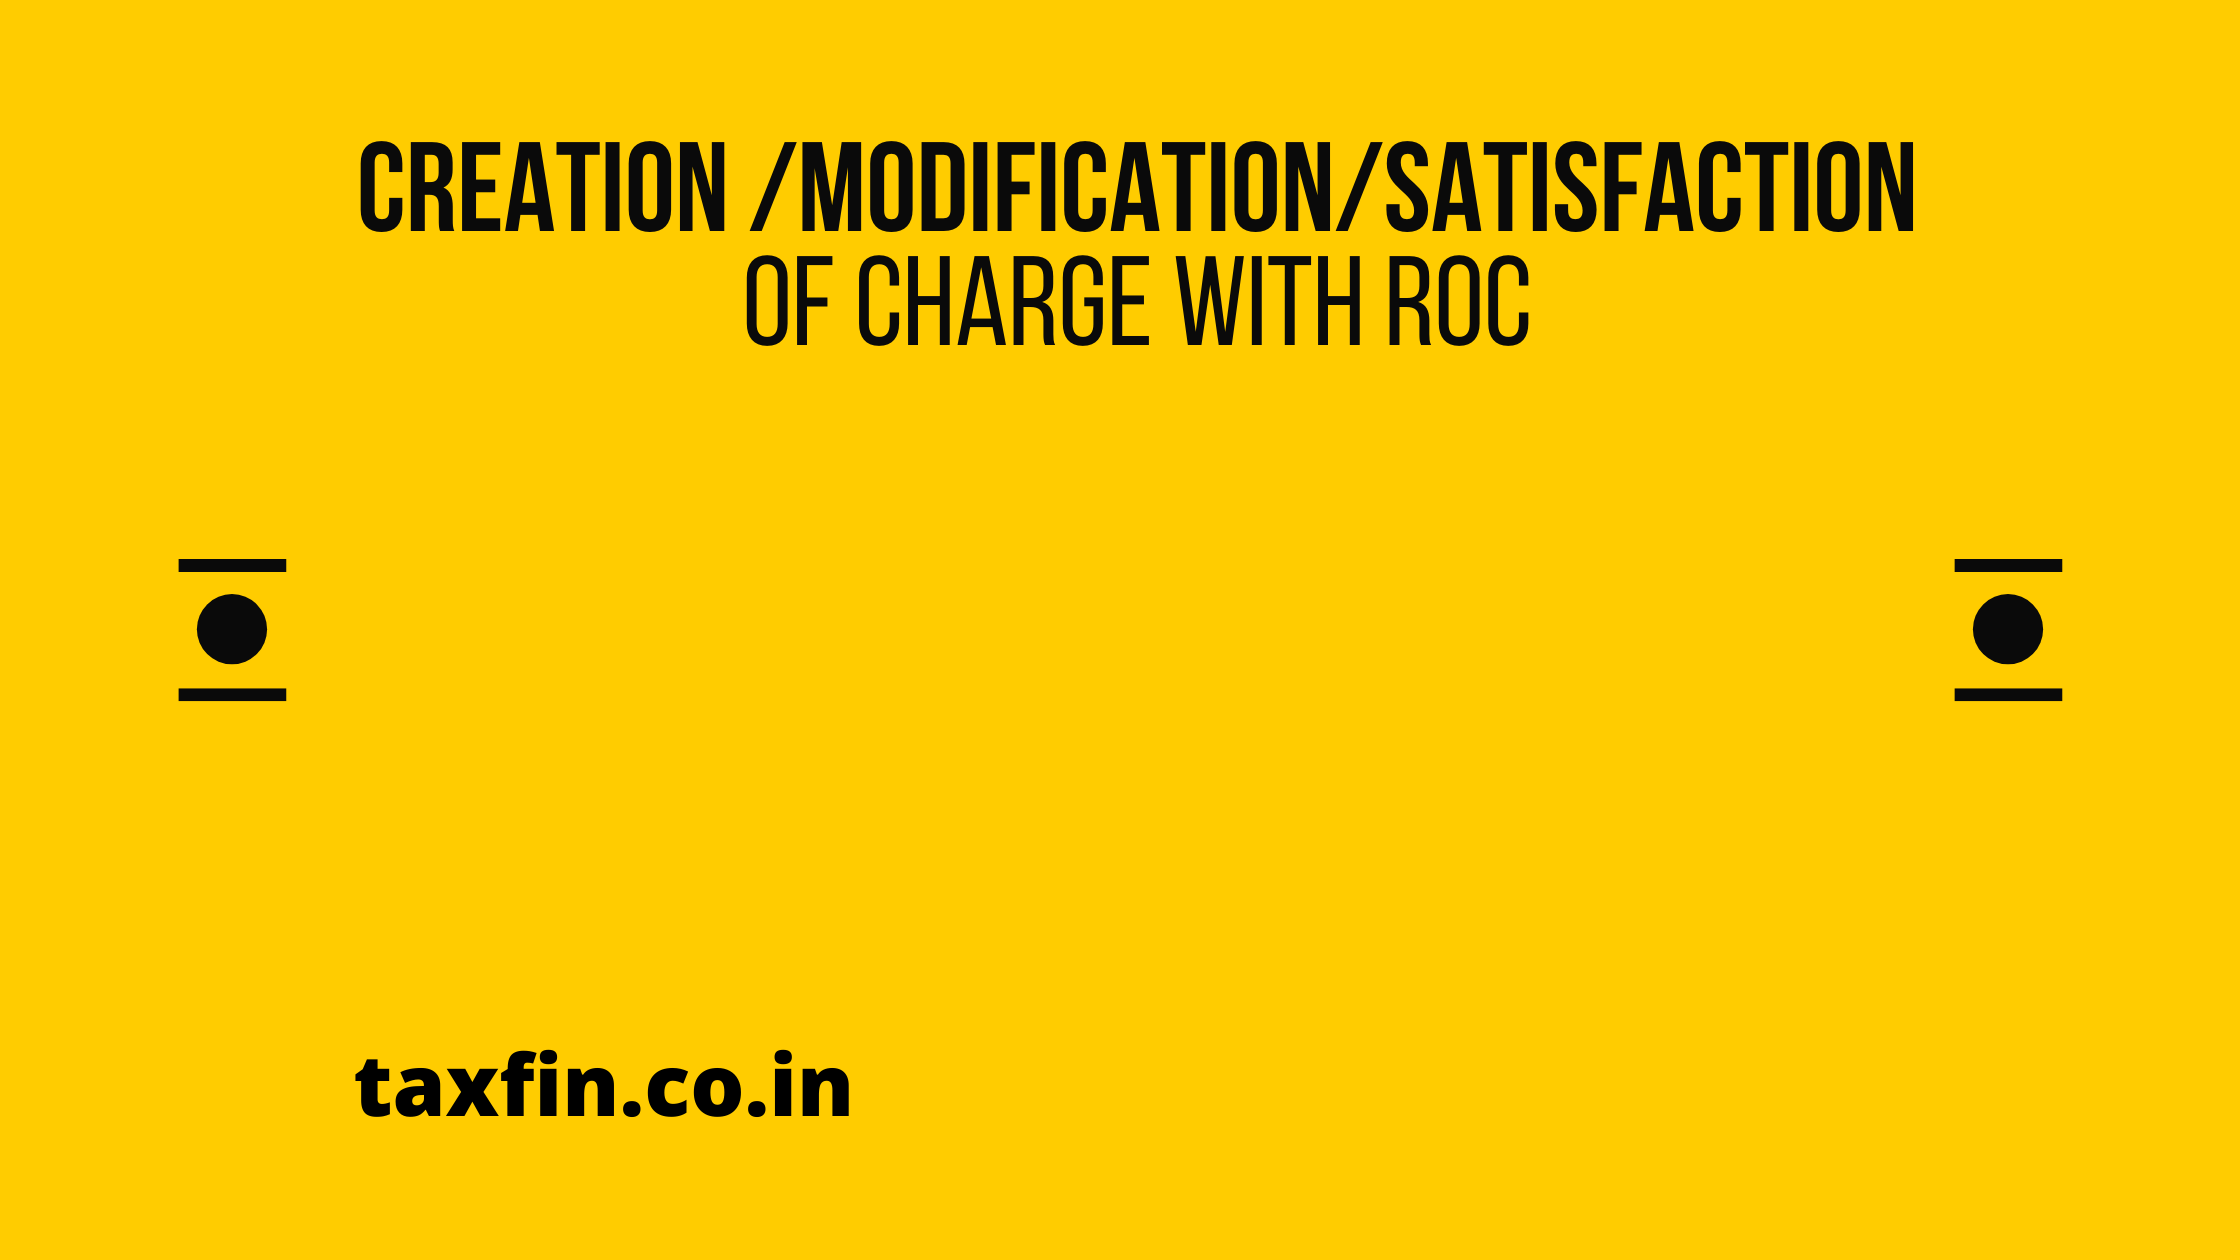 Creation /Modification/Satisfaction of Charge with ROC